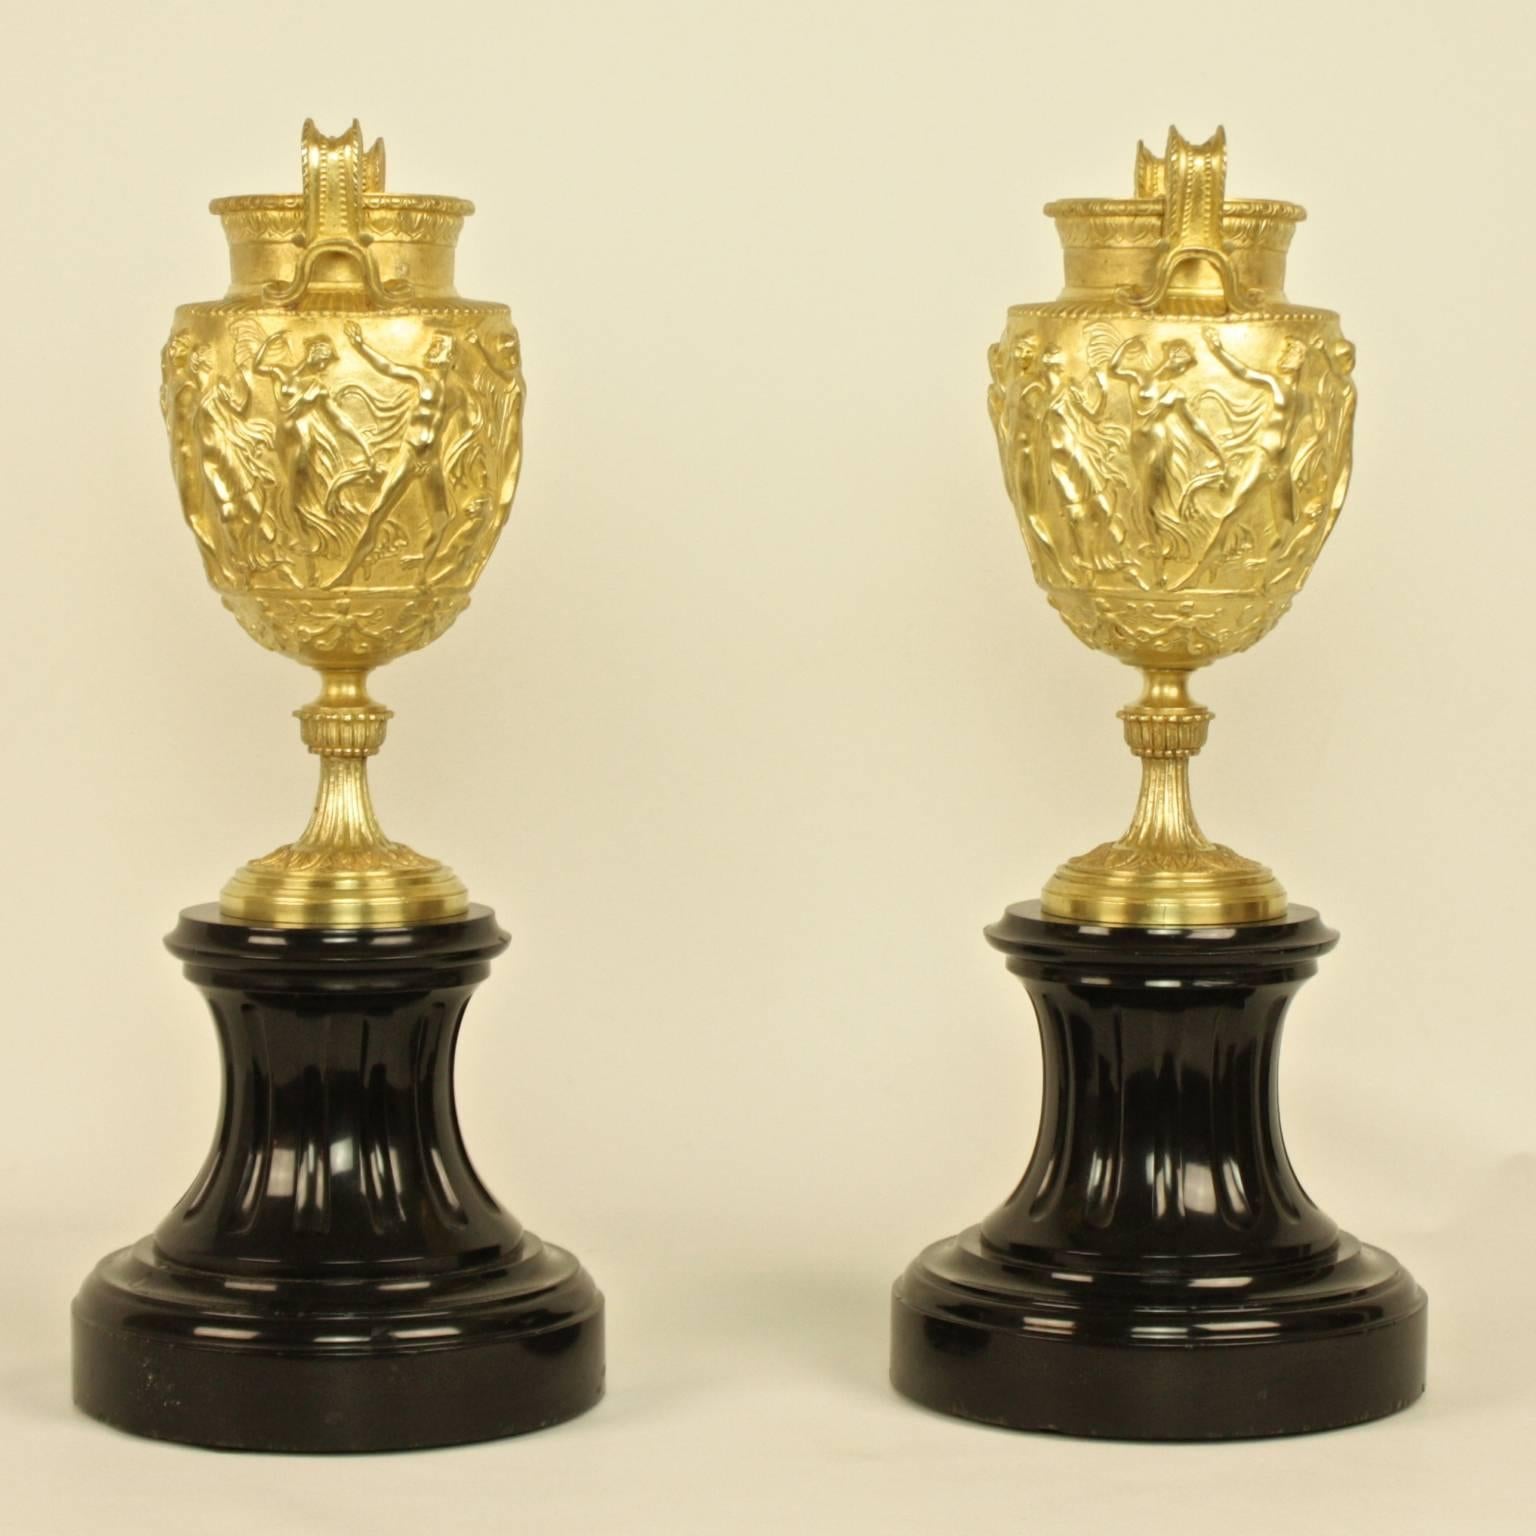 Pair of French Charles X Neoclassical Bacchanal Gilt Bronze Black Marble Urns or Vases

Pair of gilt bronze urns or vases, each with two volute handles inspired by Greek ancient volute-krater vases, the tapering ovoid body cast in high relief